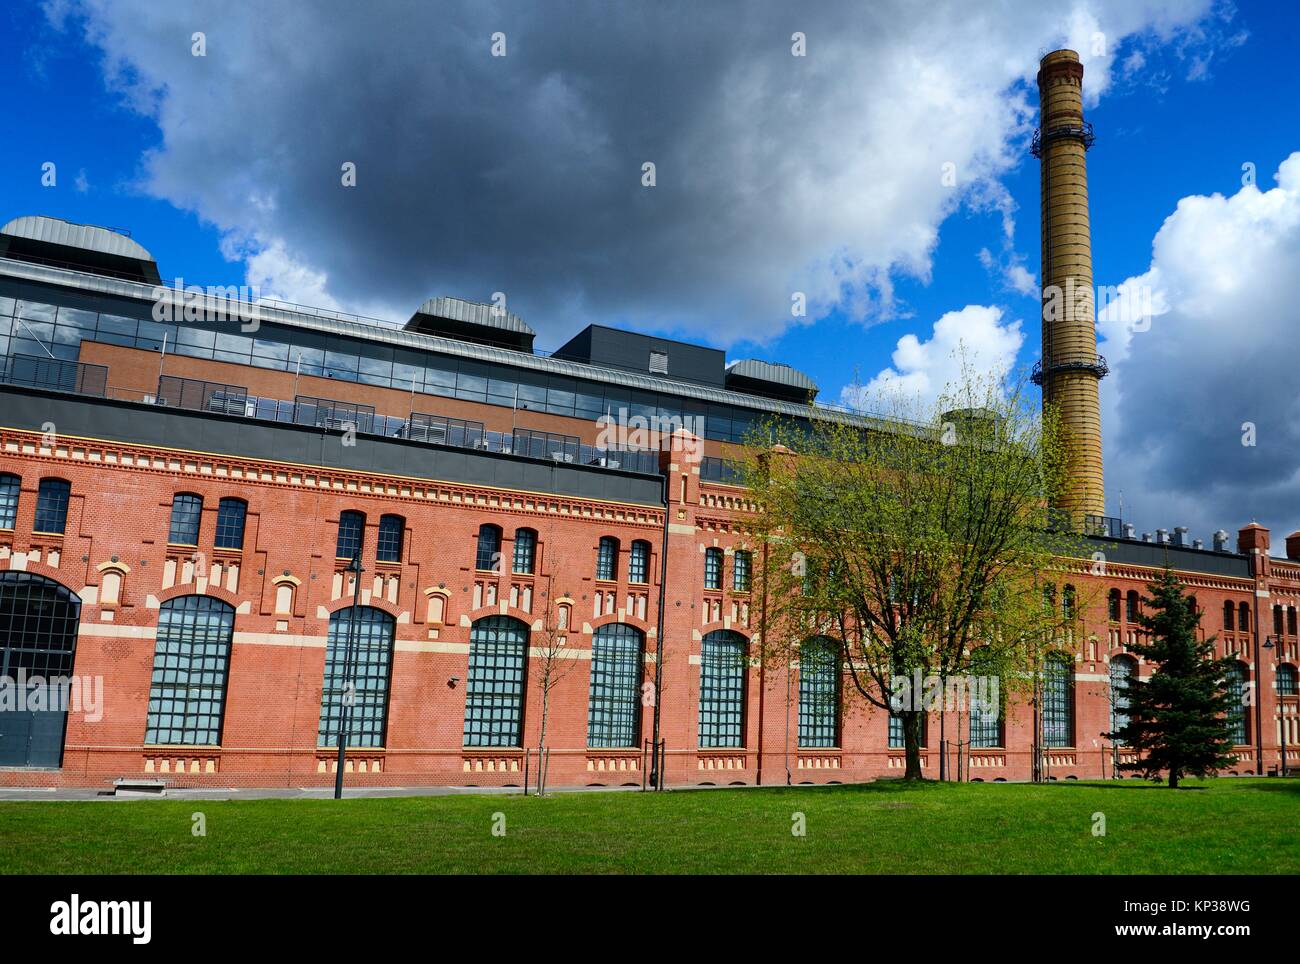 EC 1 - The first city power plant in Lodz was opened in 1907 at Targowa street and operated until 2001,from 2008 the whole complex of buildings of Stock Photo